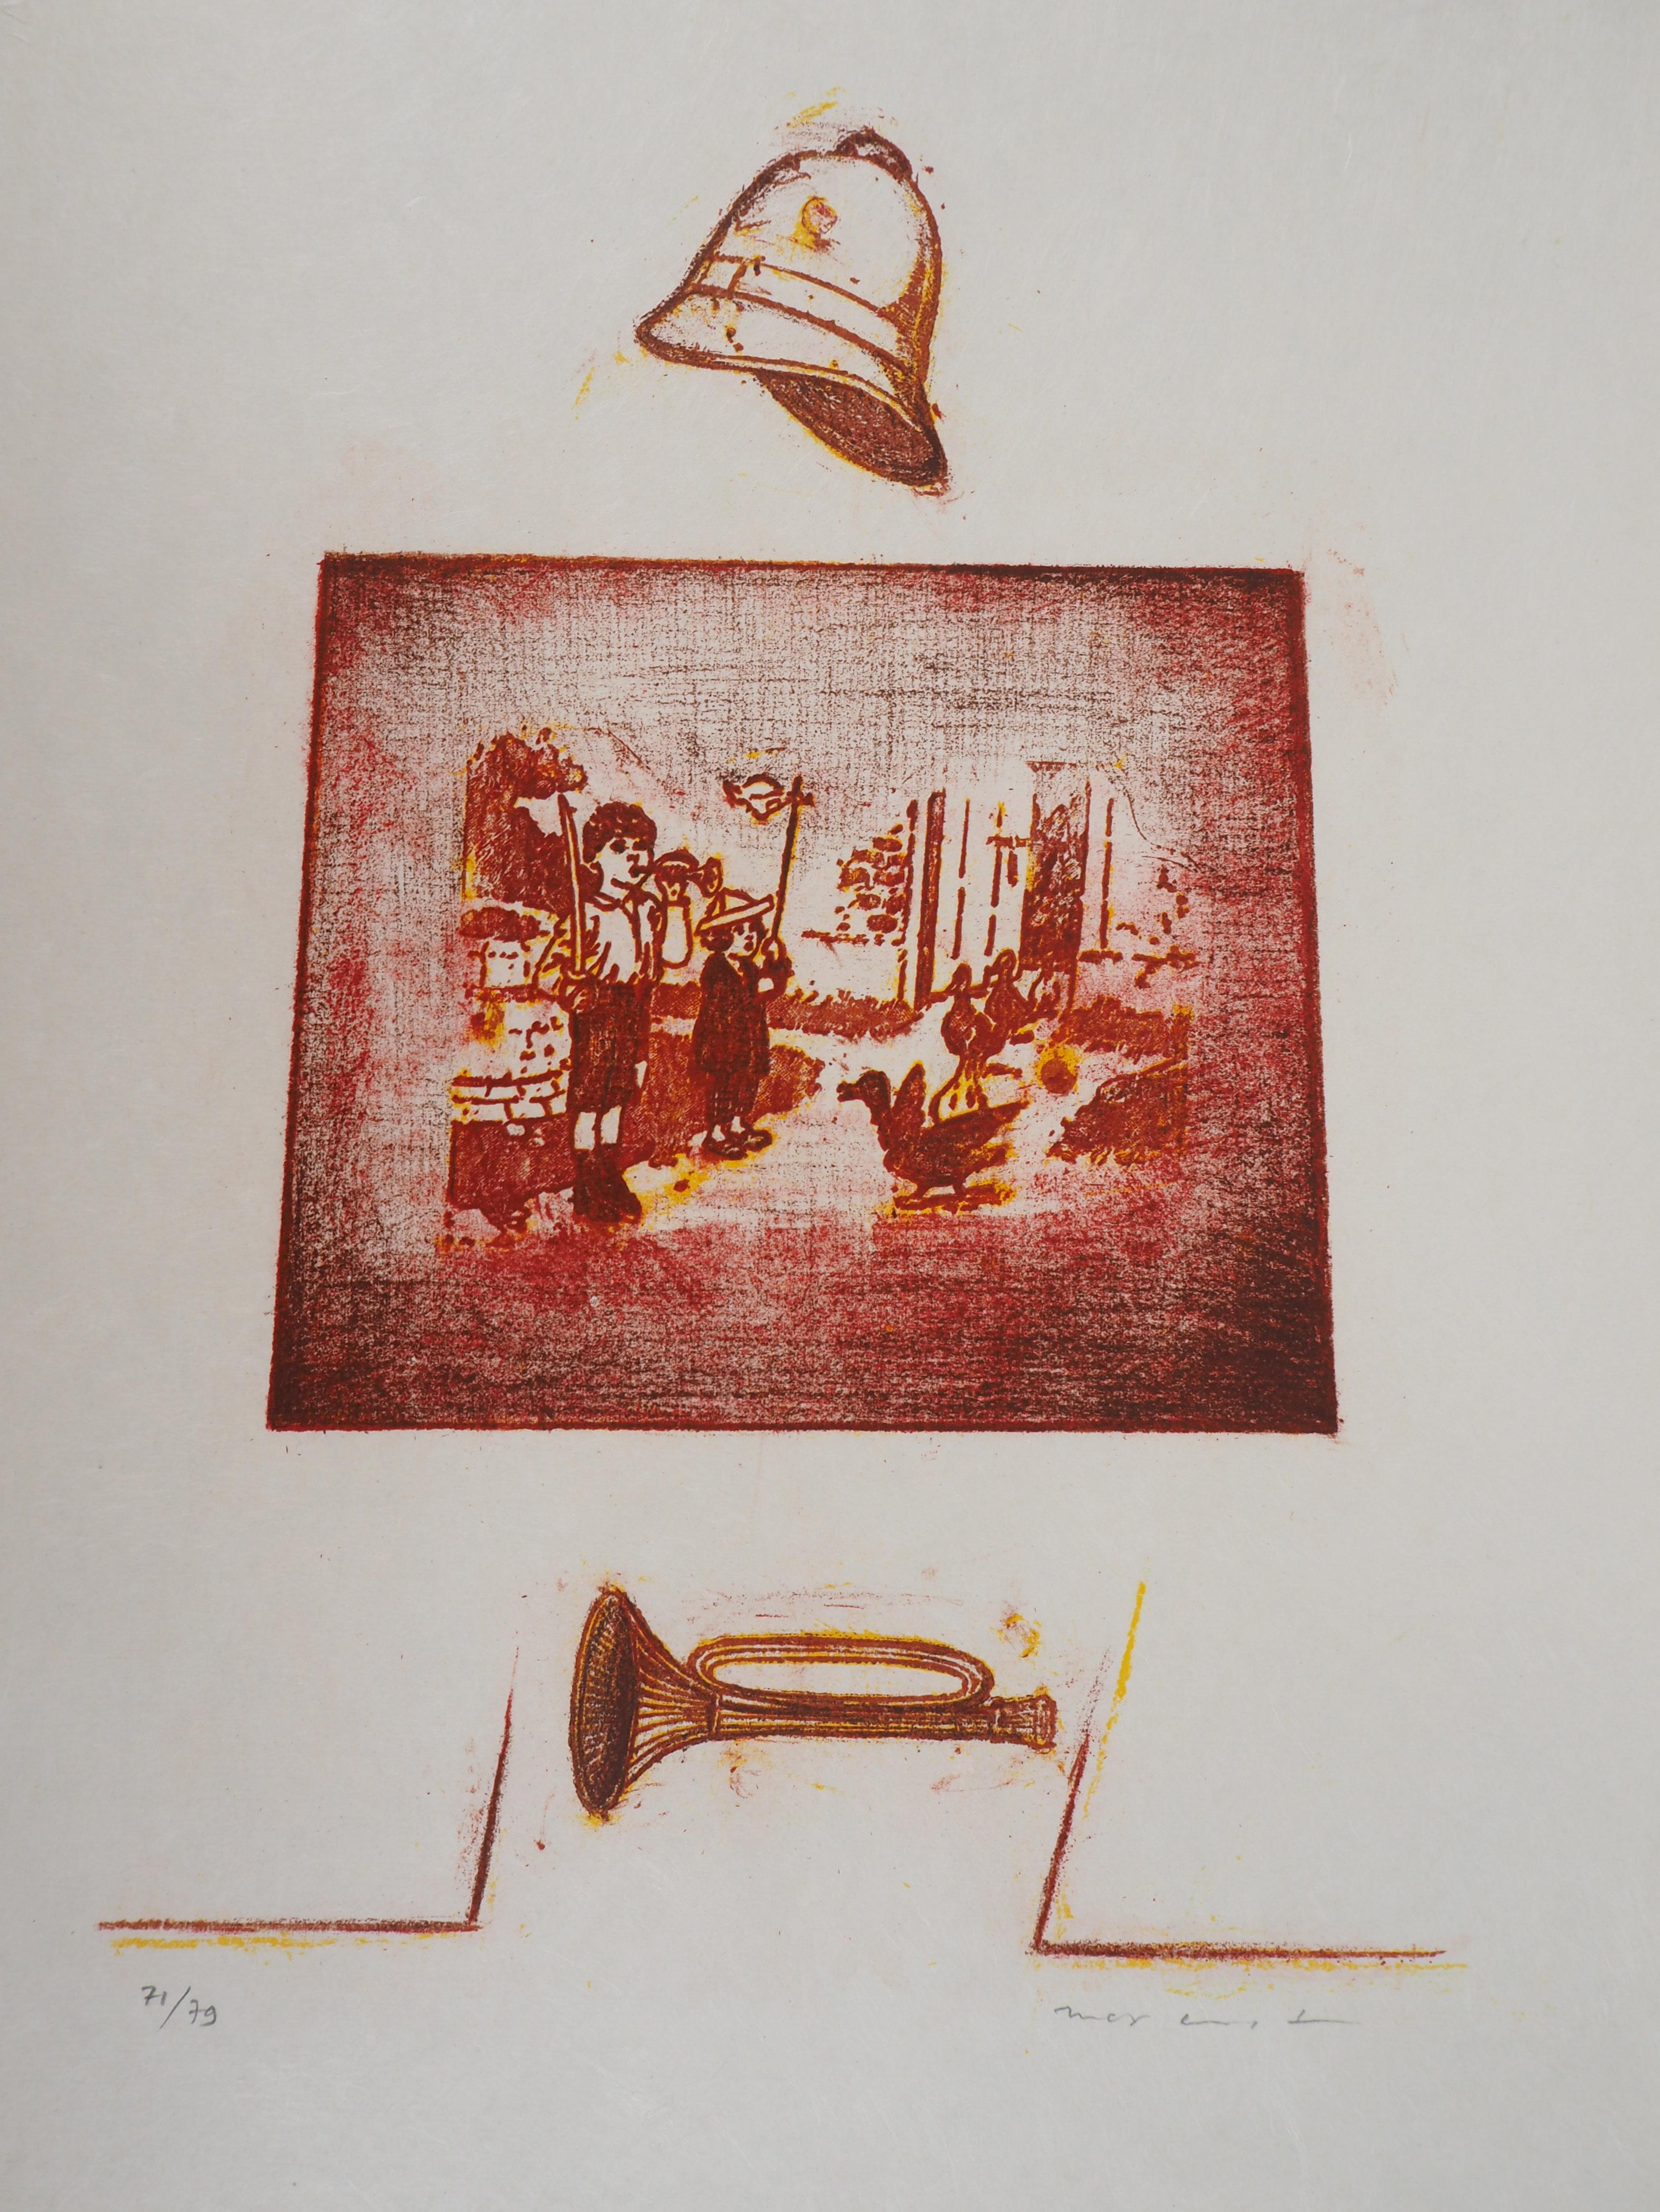 Max Ernst Abstract Print - Red Memory - Original Lithograph Handsigned and limited 79 copies - Mourlot 1972